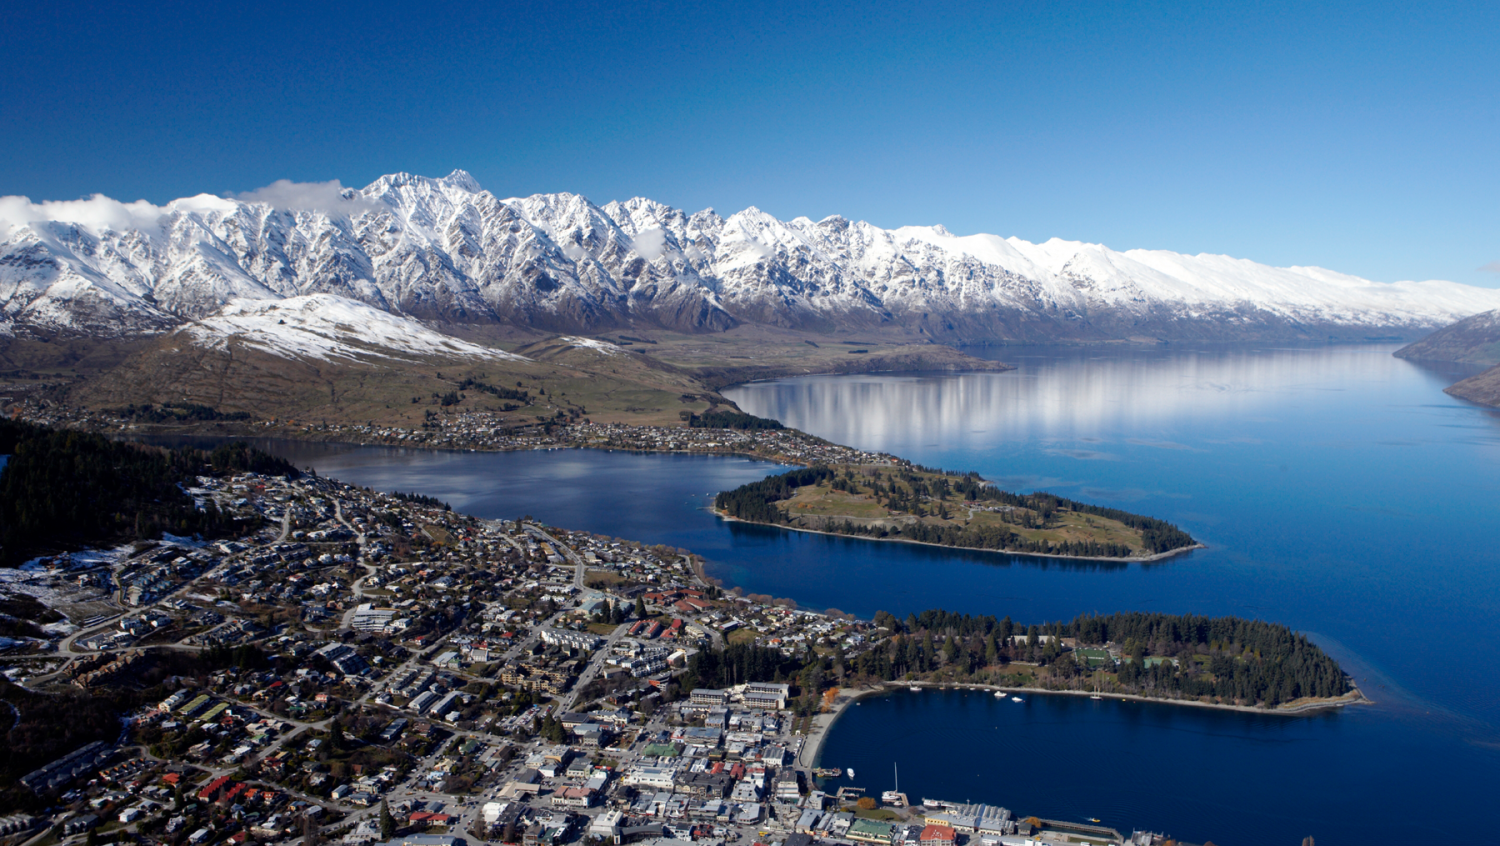 Image 1 for Queenstown, a view from every angle